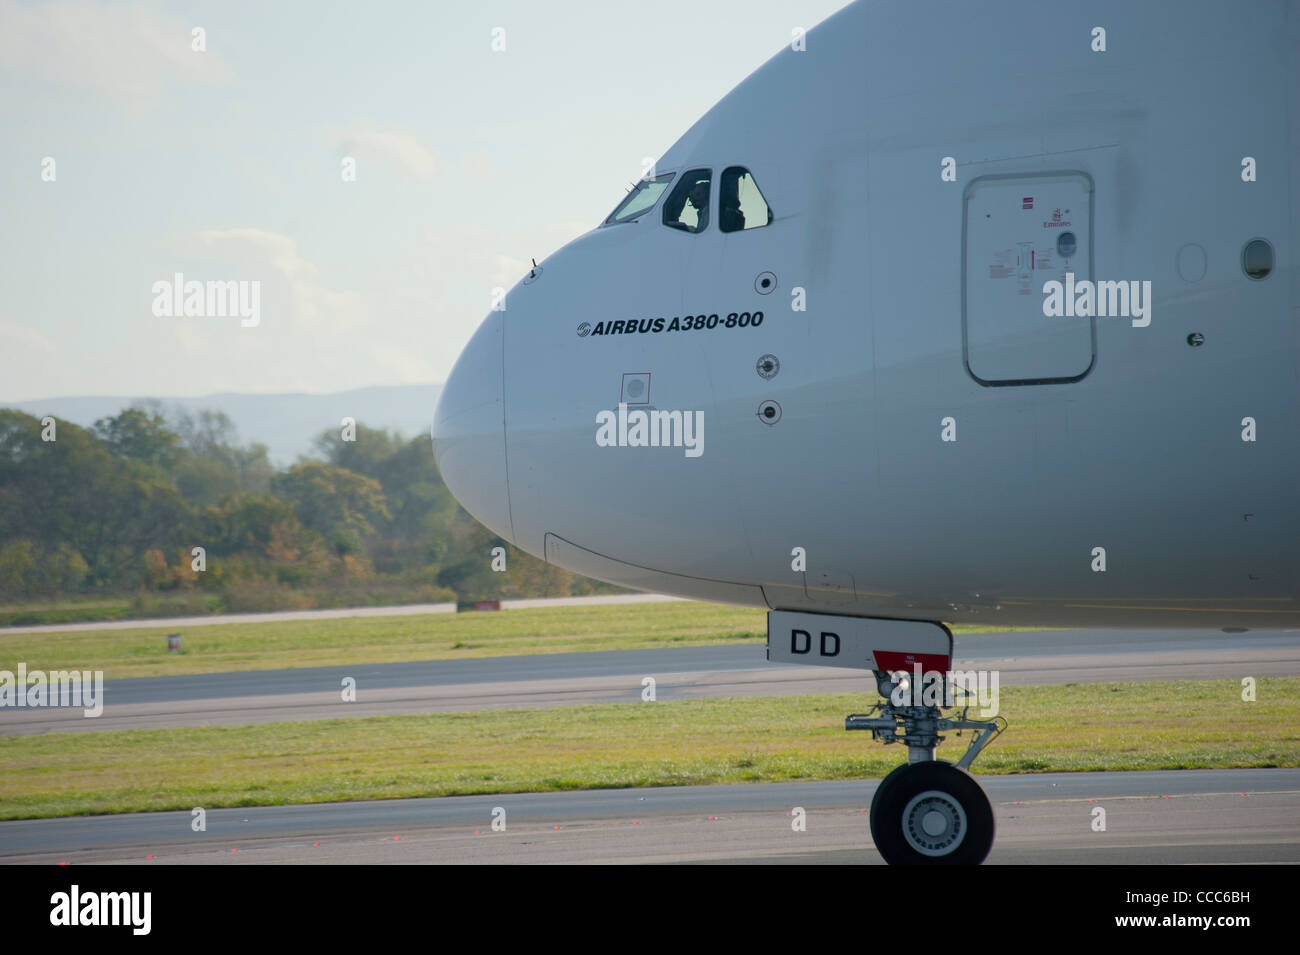 Airbus A380-800 At Manchester Airport England Uk Stock Photo